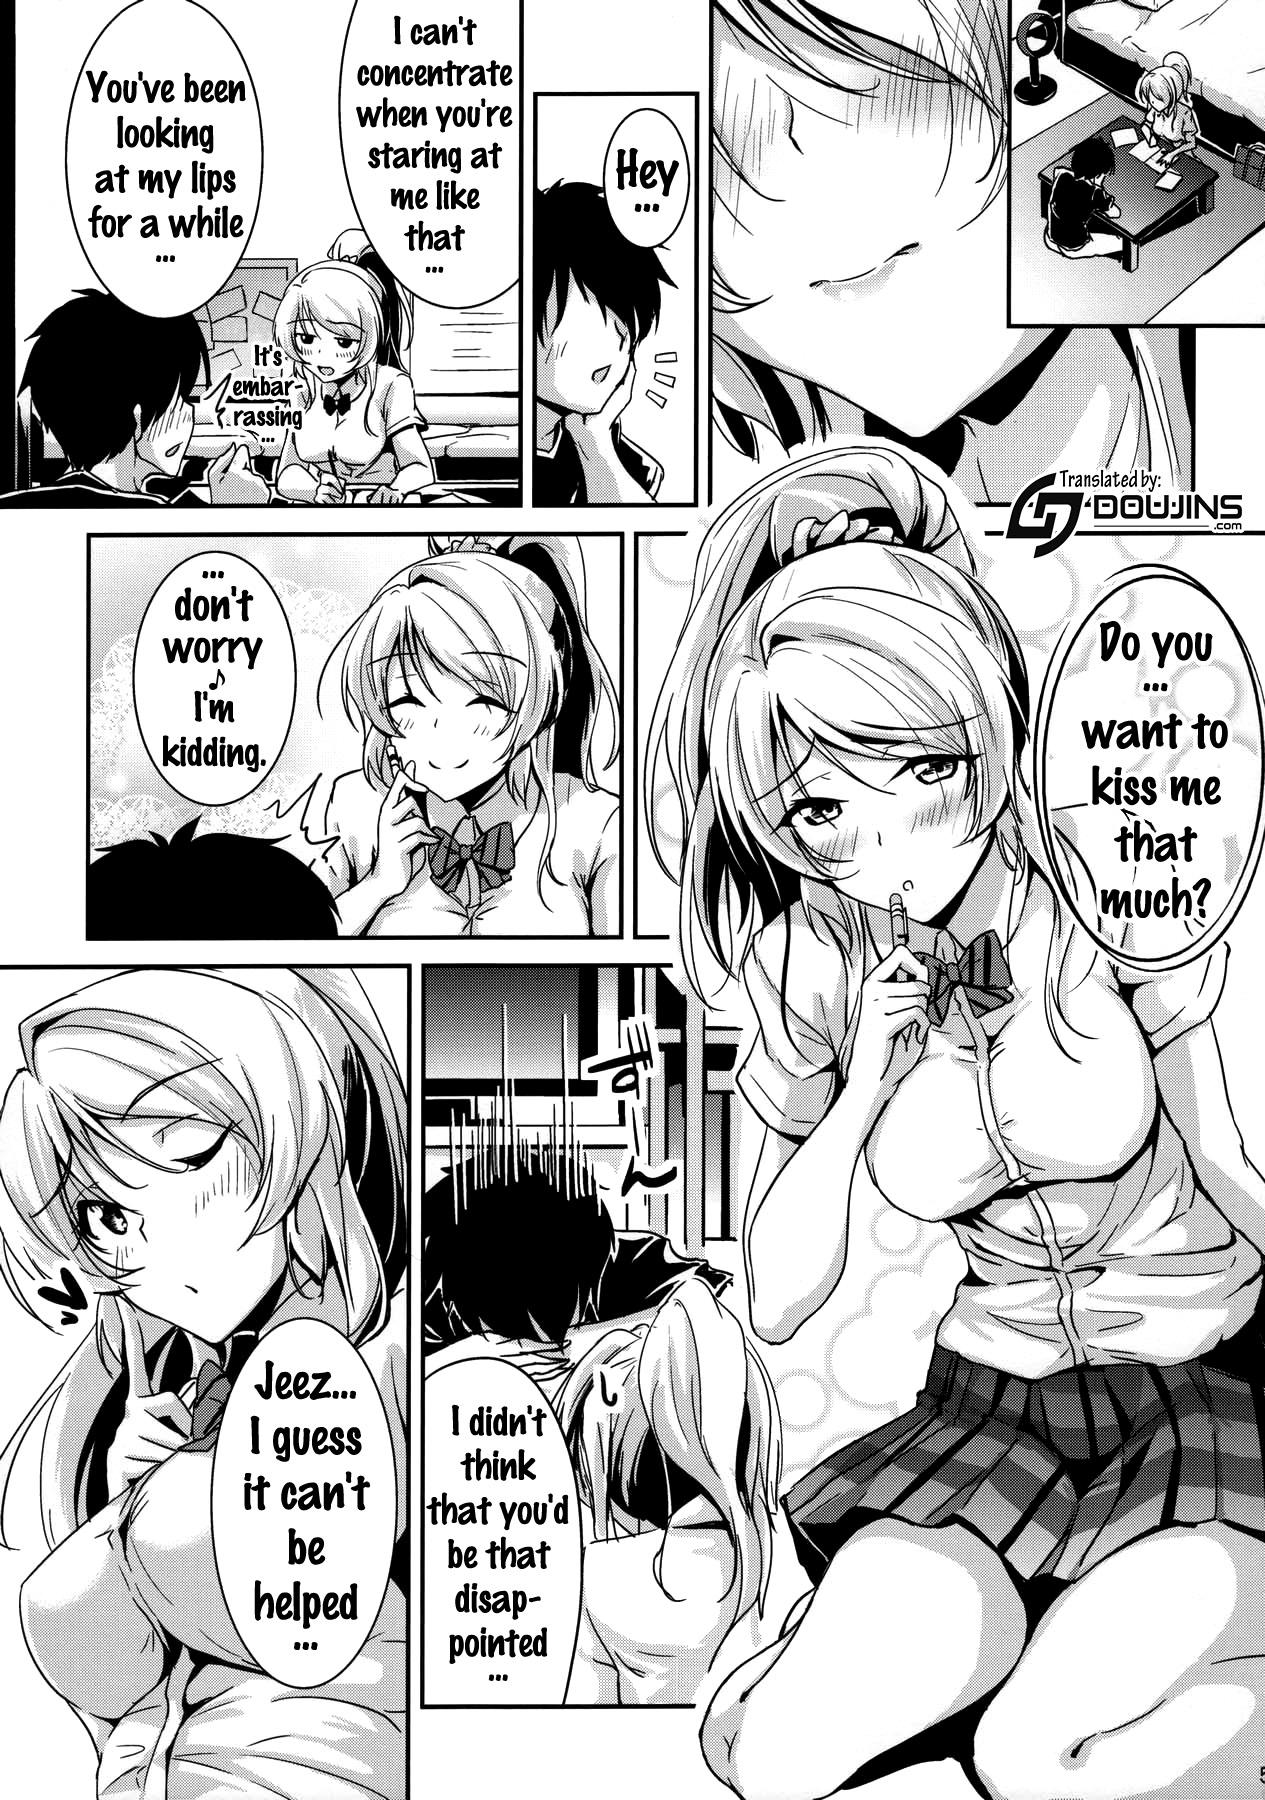 Phat kiss me ellie - Love live Hot Wife - Page 4